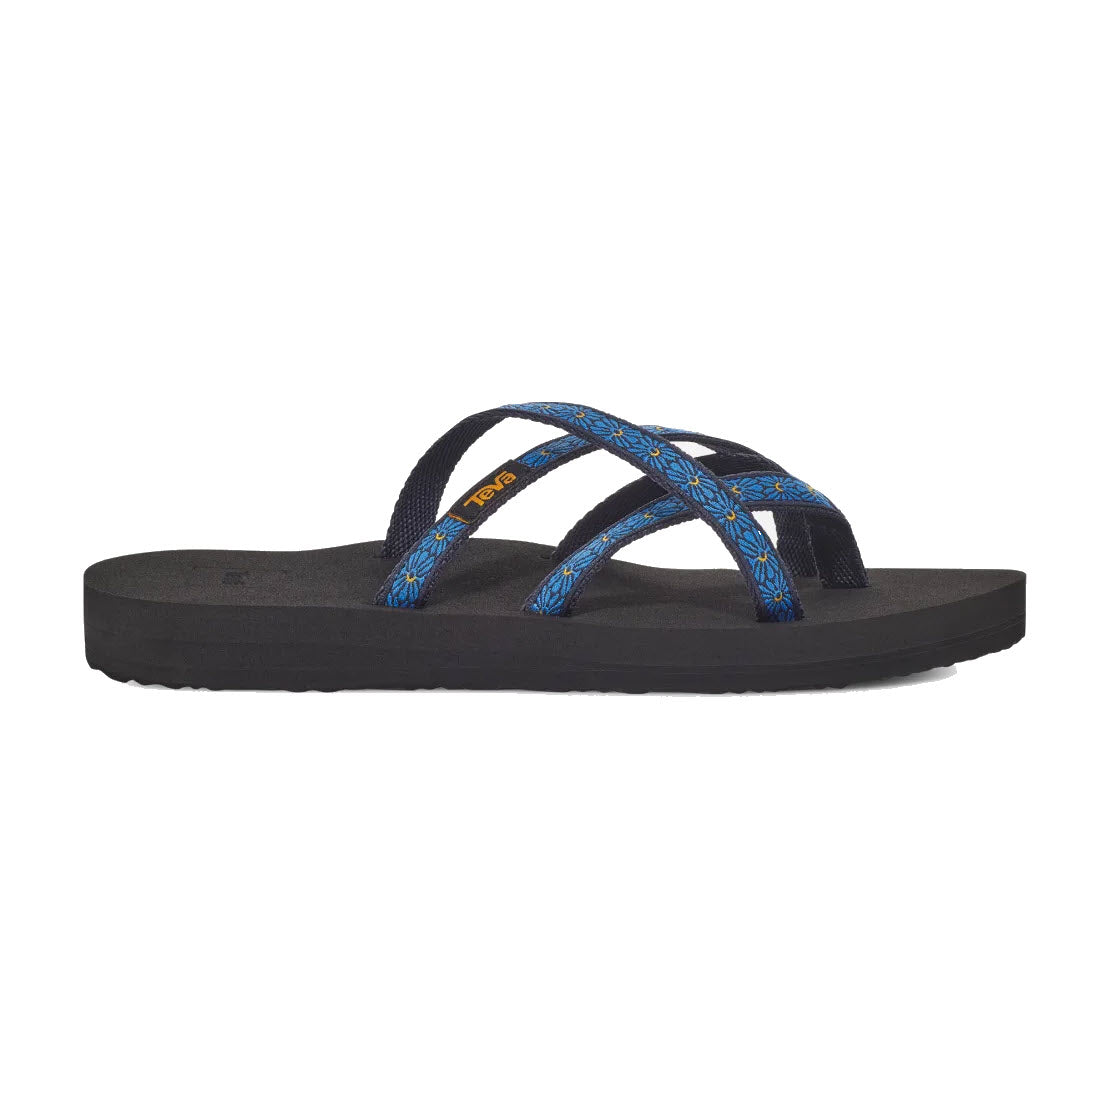 A single black slip-on sandal with blue and yellow patterned straps, Teva Olowahu Flower Loom Navy - Womens.